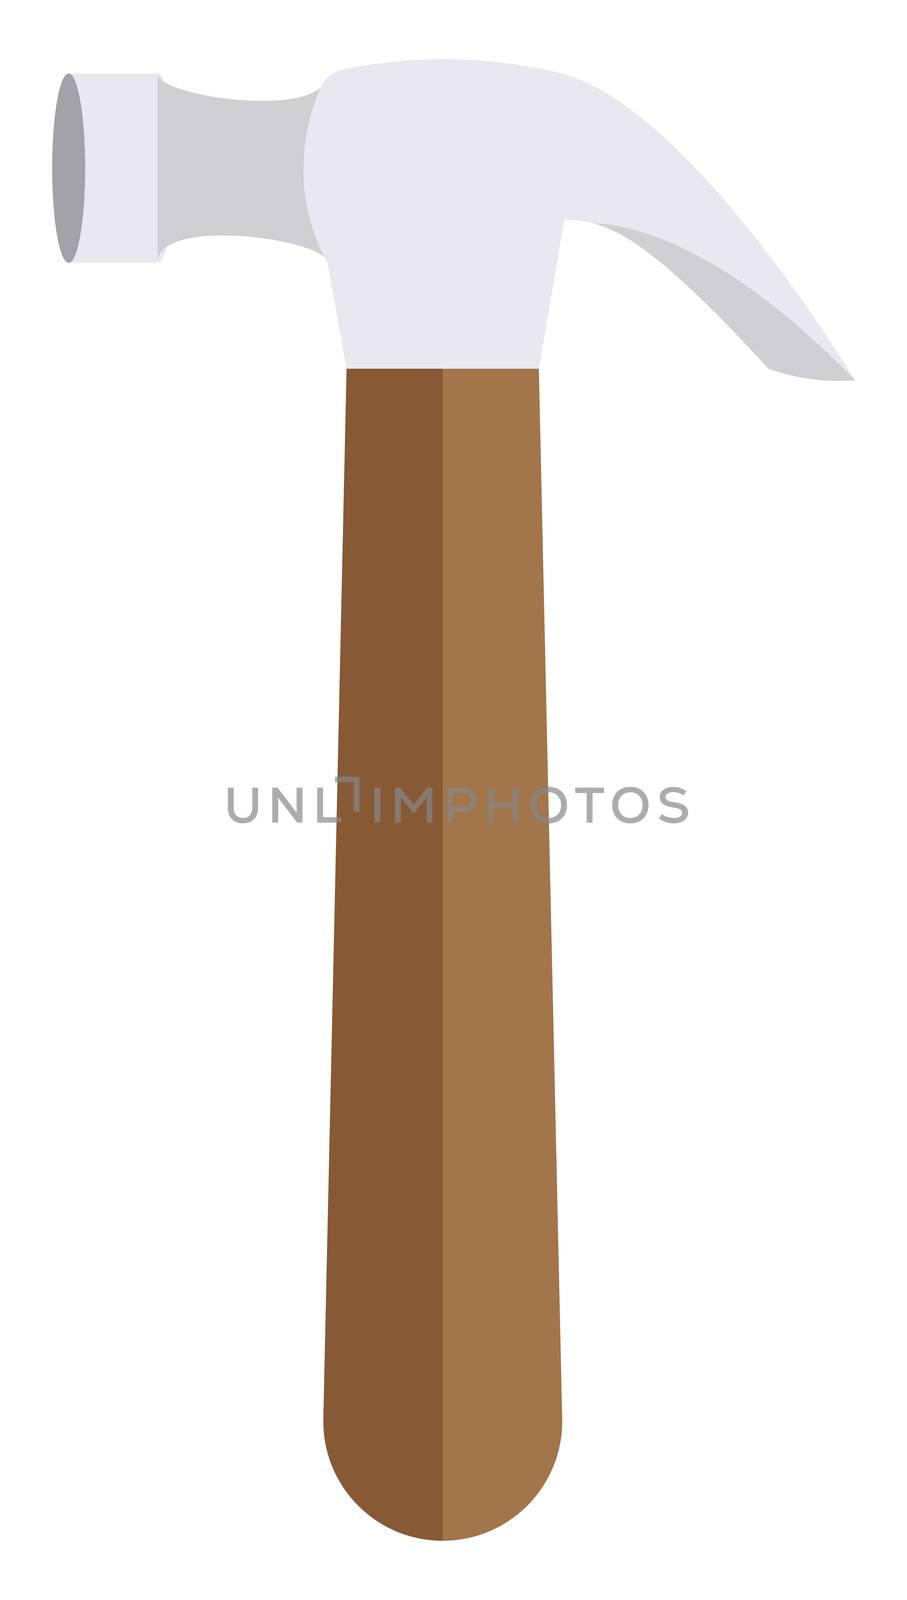 Claw hammer, illustration, vector on white background